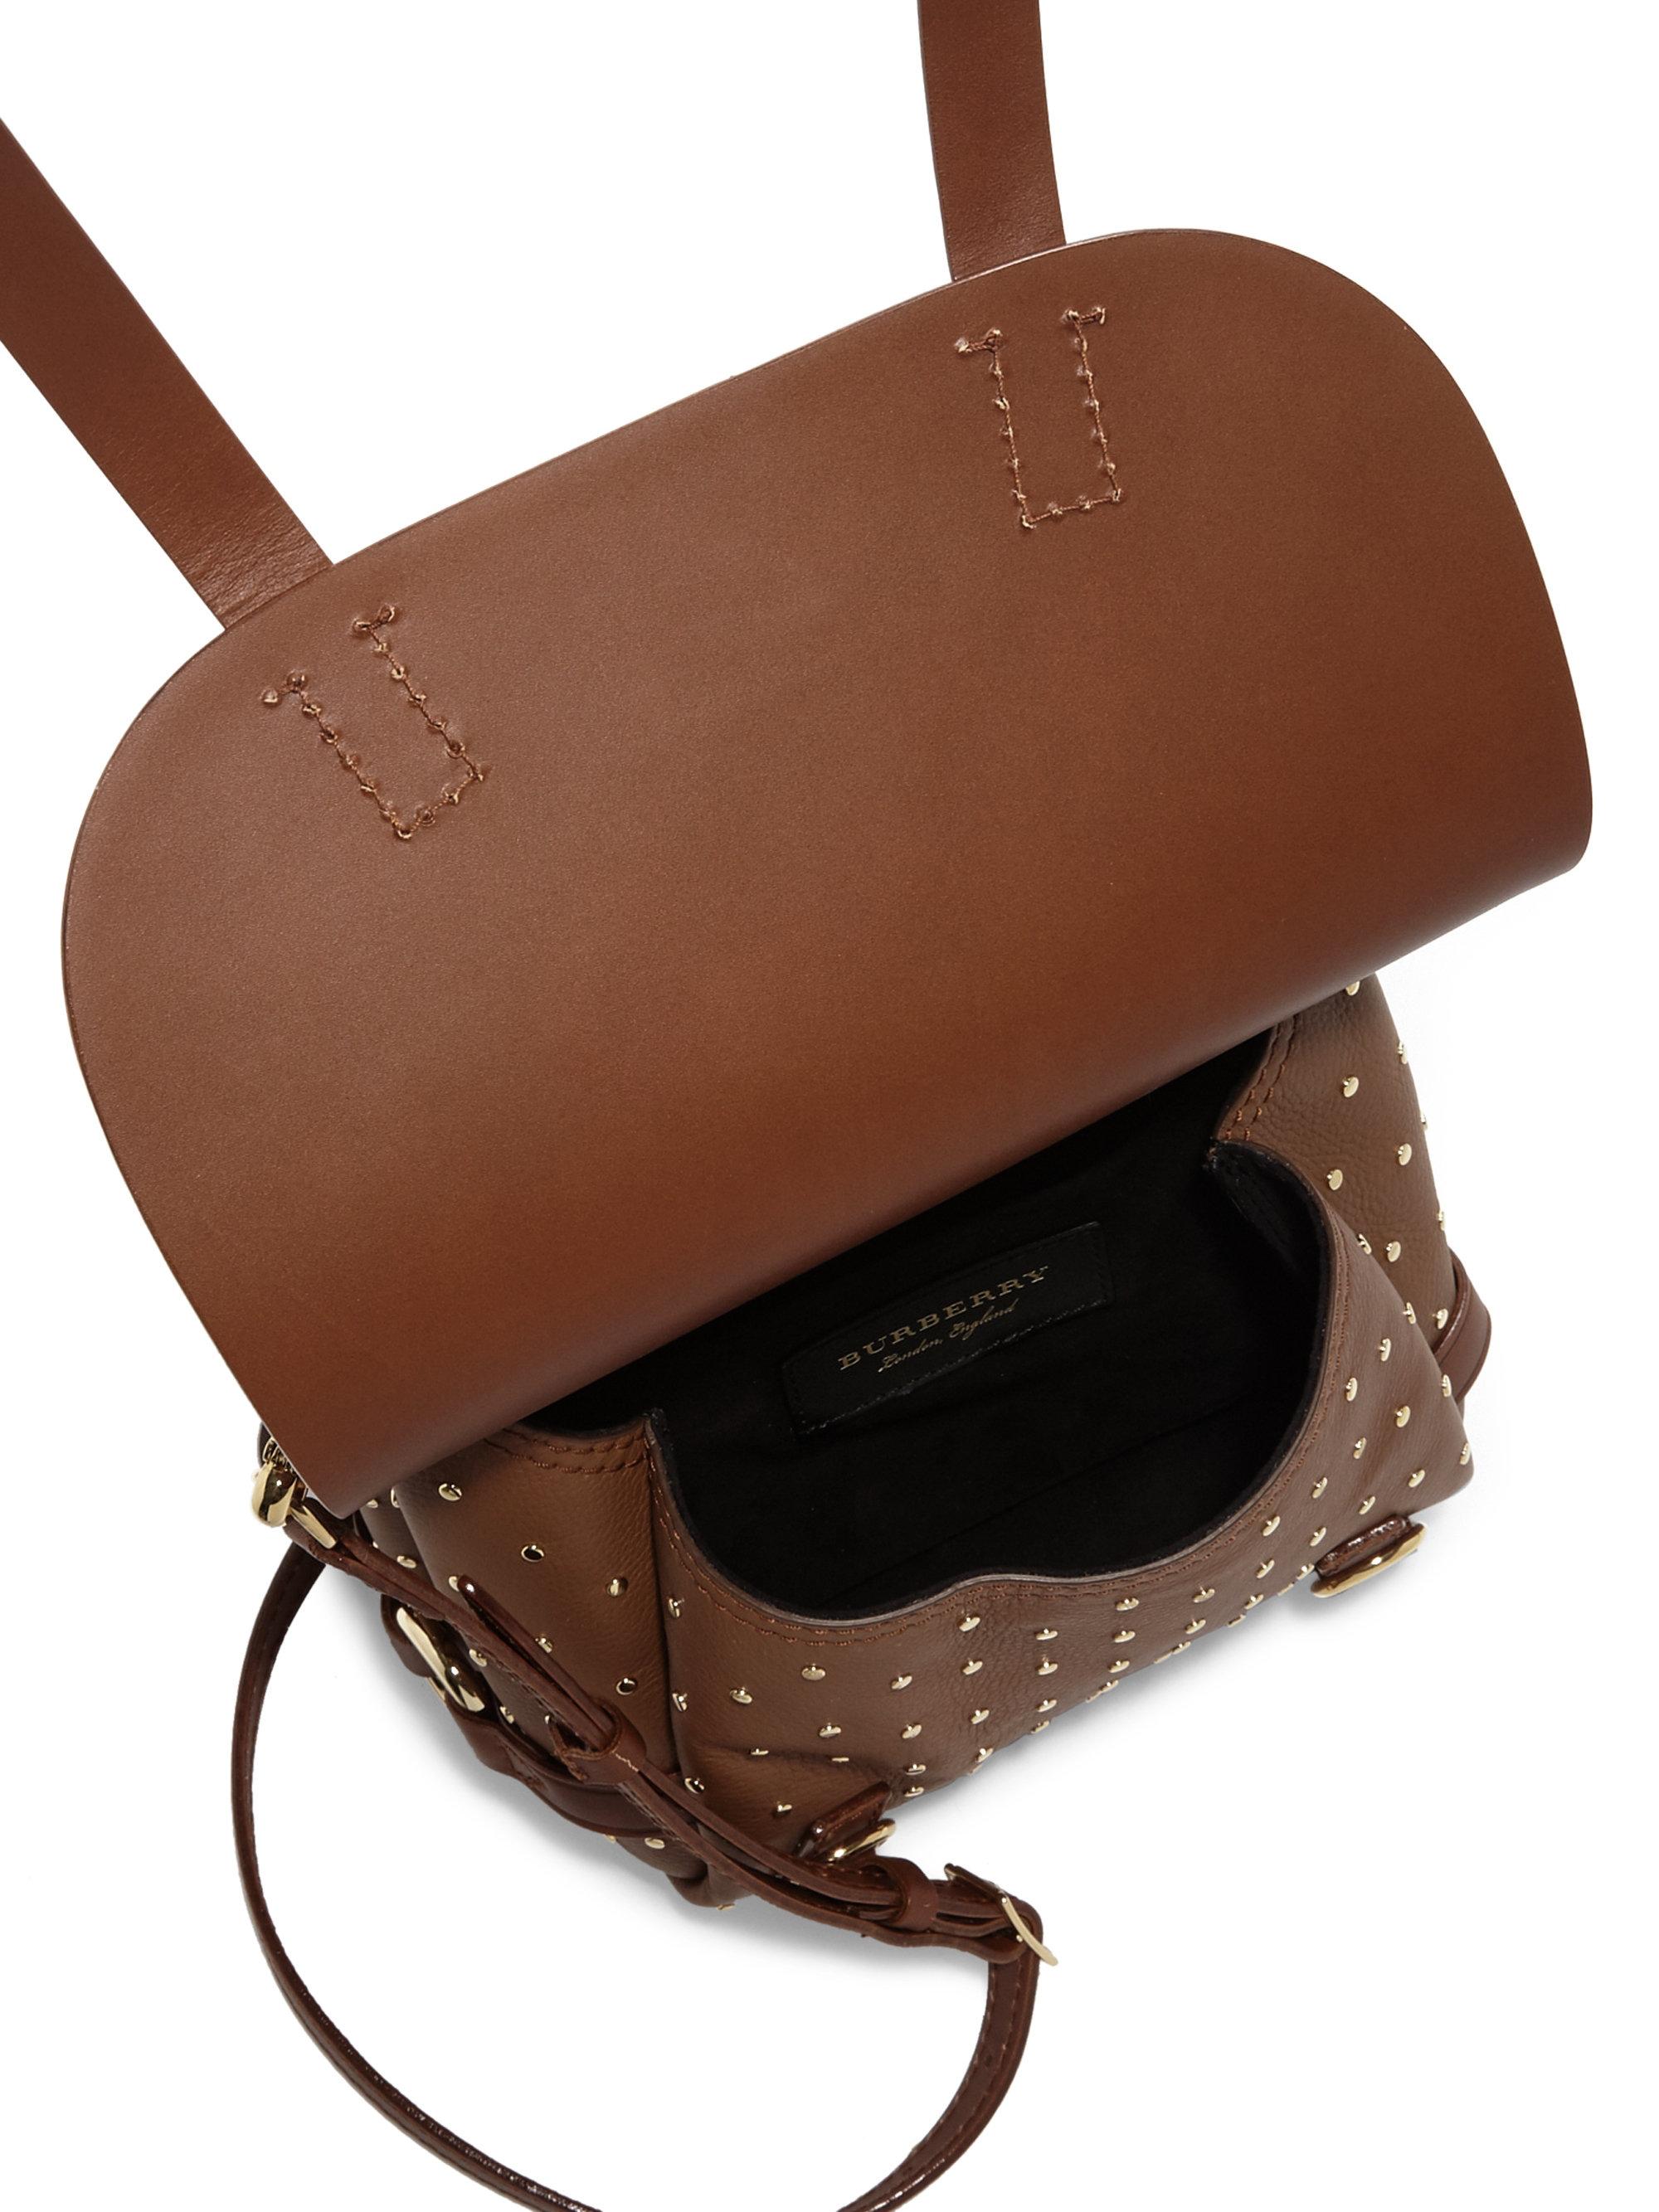 The Baby Bridle Bag in Riveted Leather